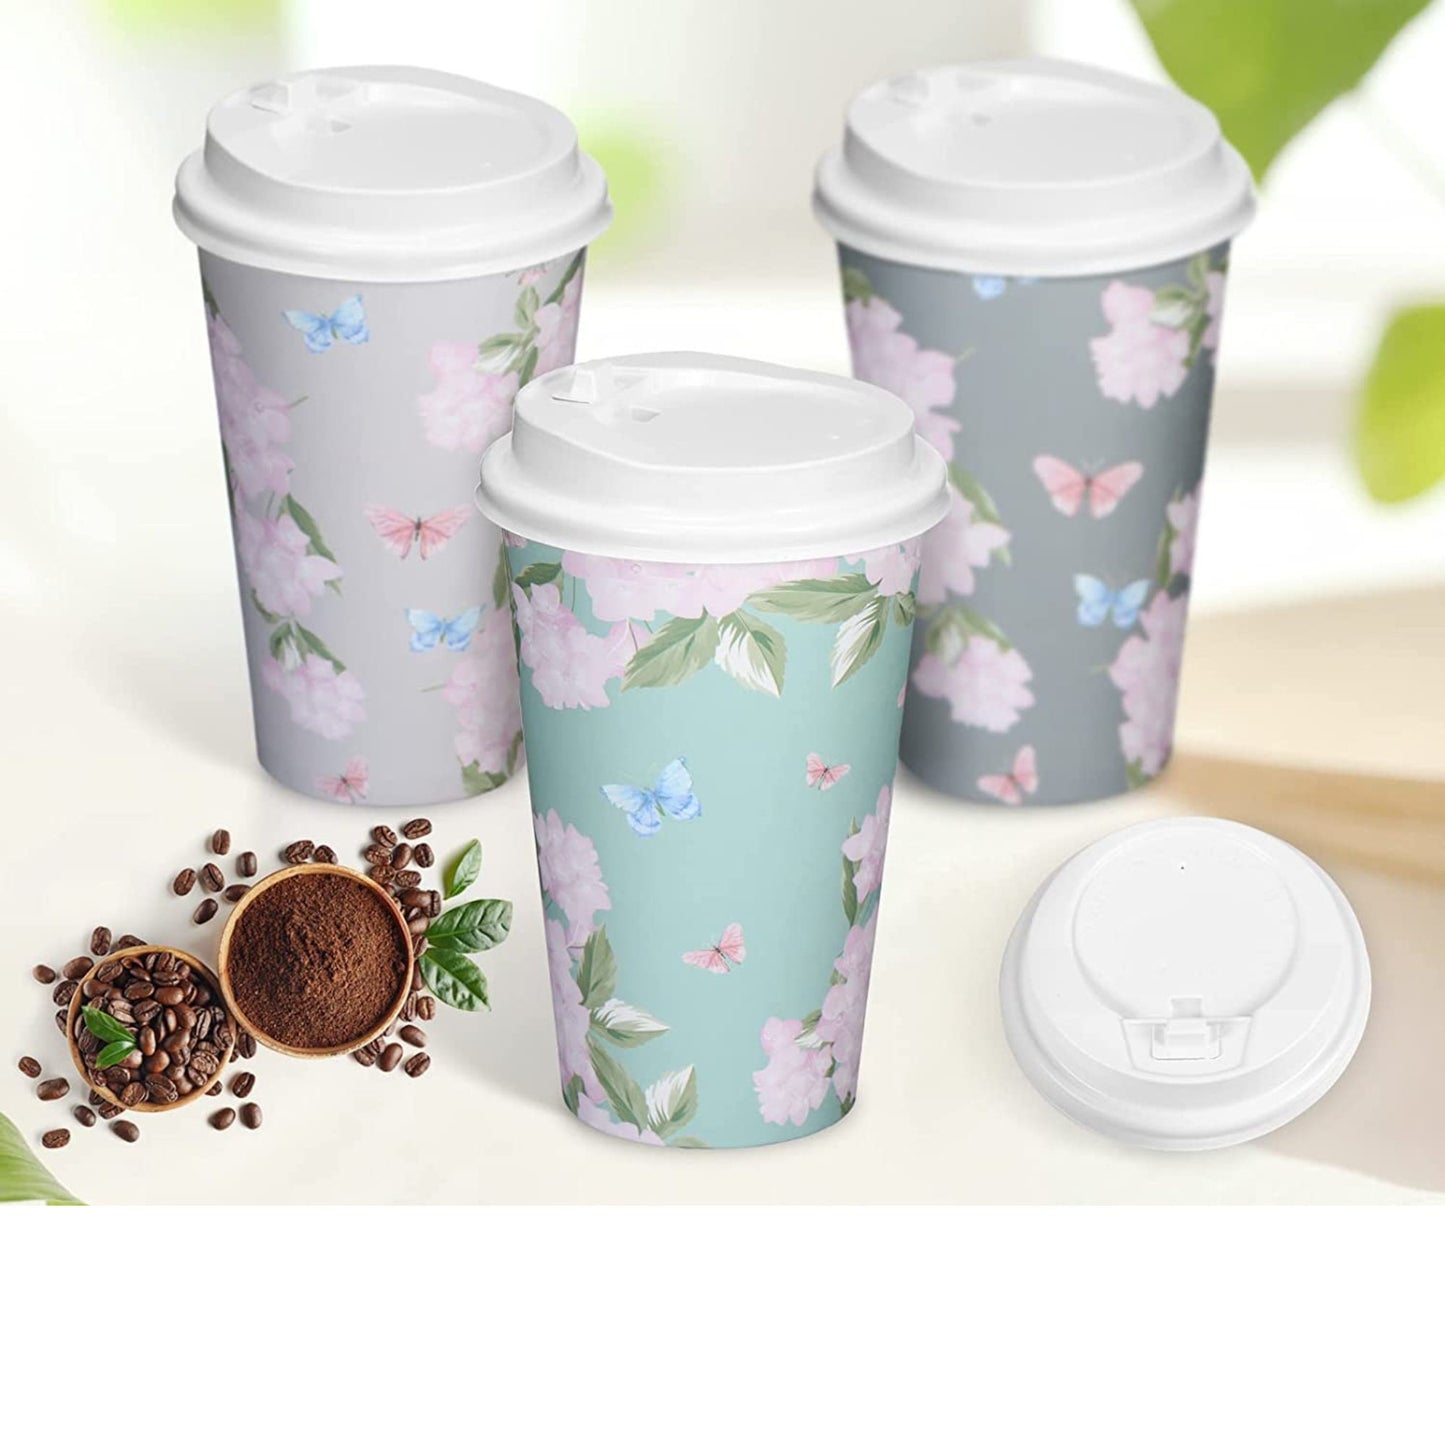 Floral Paper Insulated 16 oz Disposable Coffee Cups w/Lids and Sleeve for Bridal Baby Shower Wedding